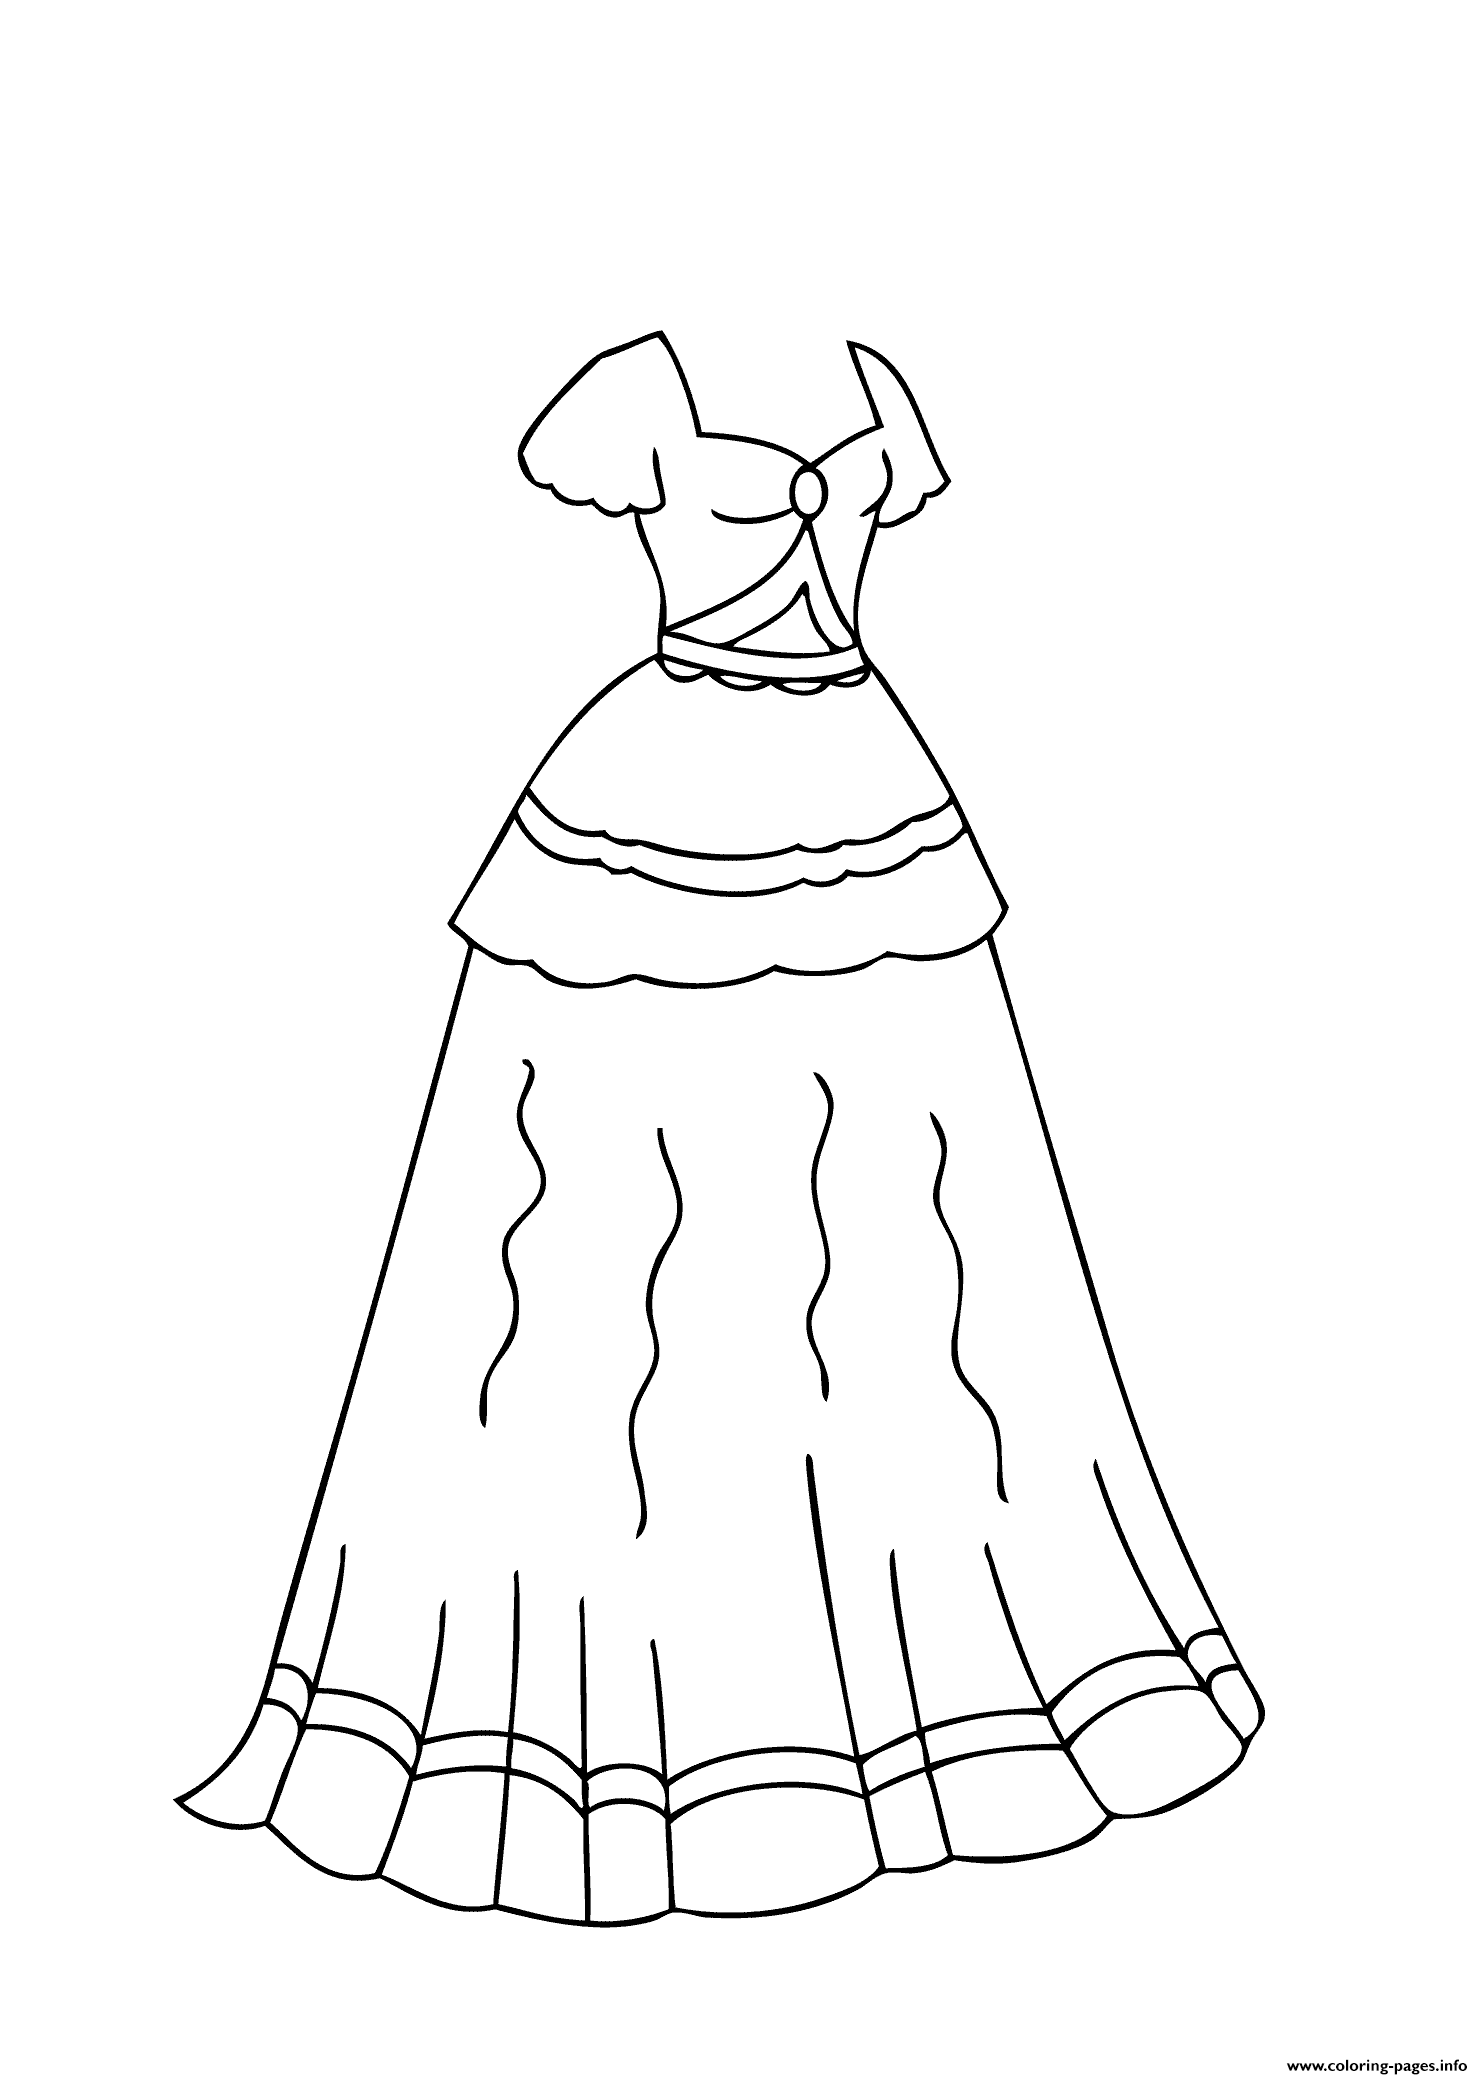 Dress Coloring Pages Printable